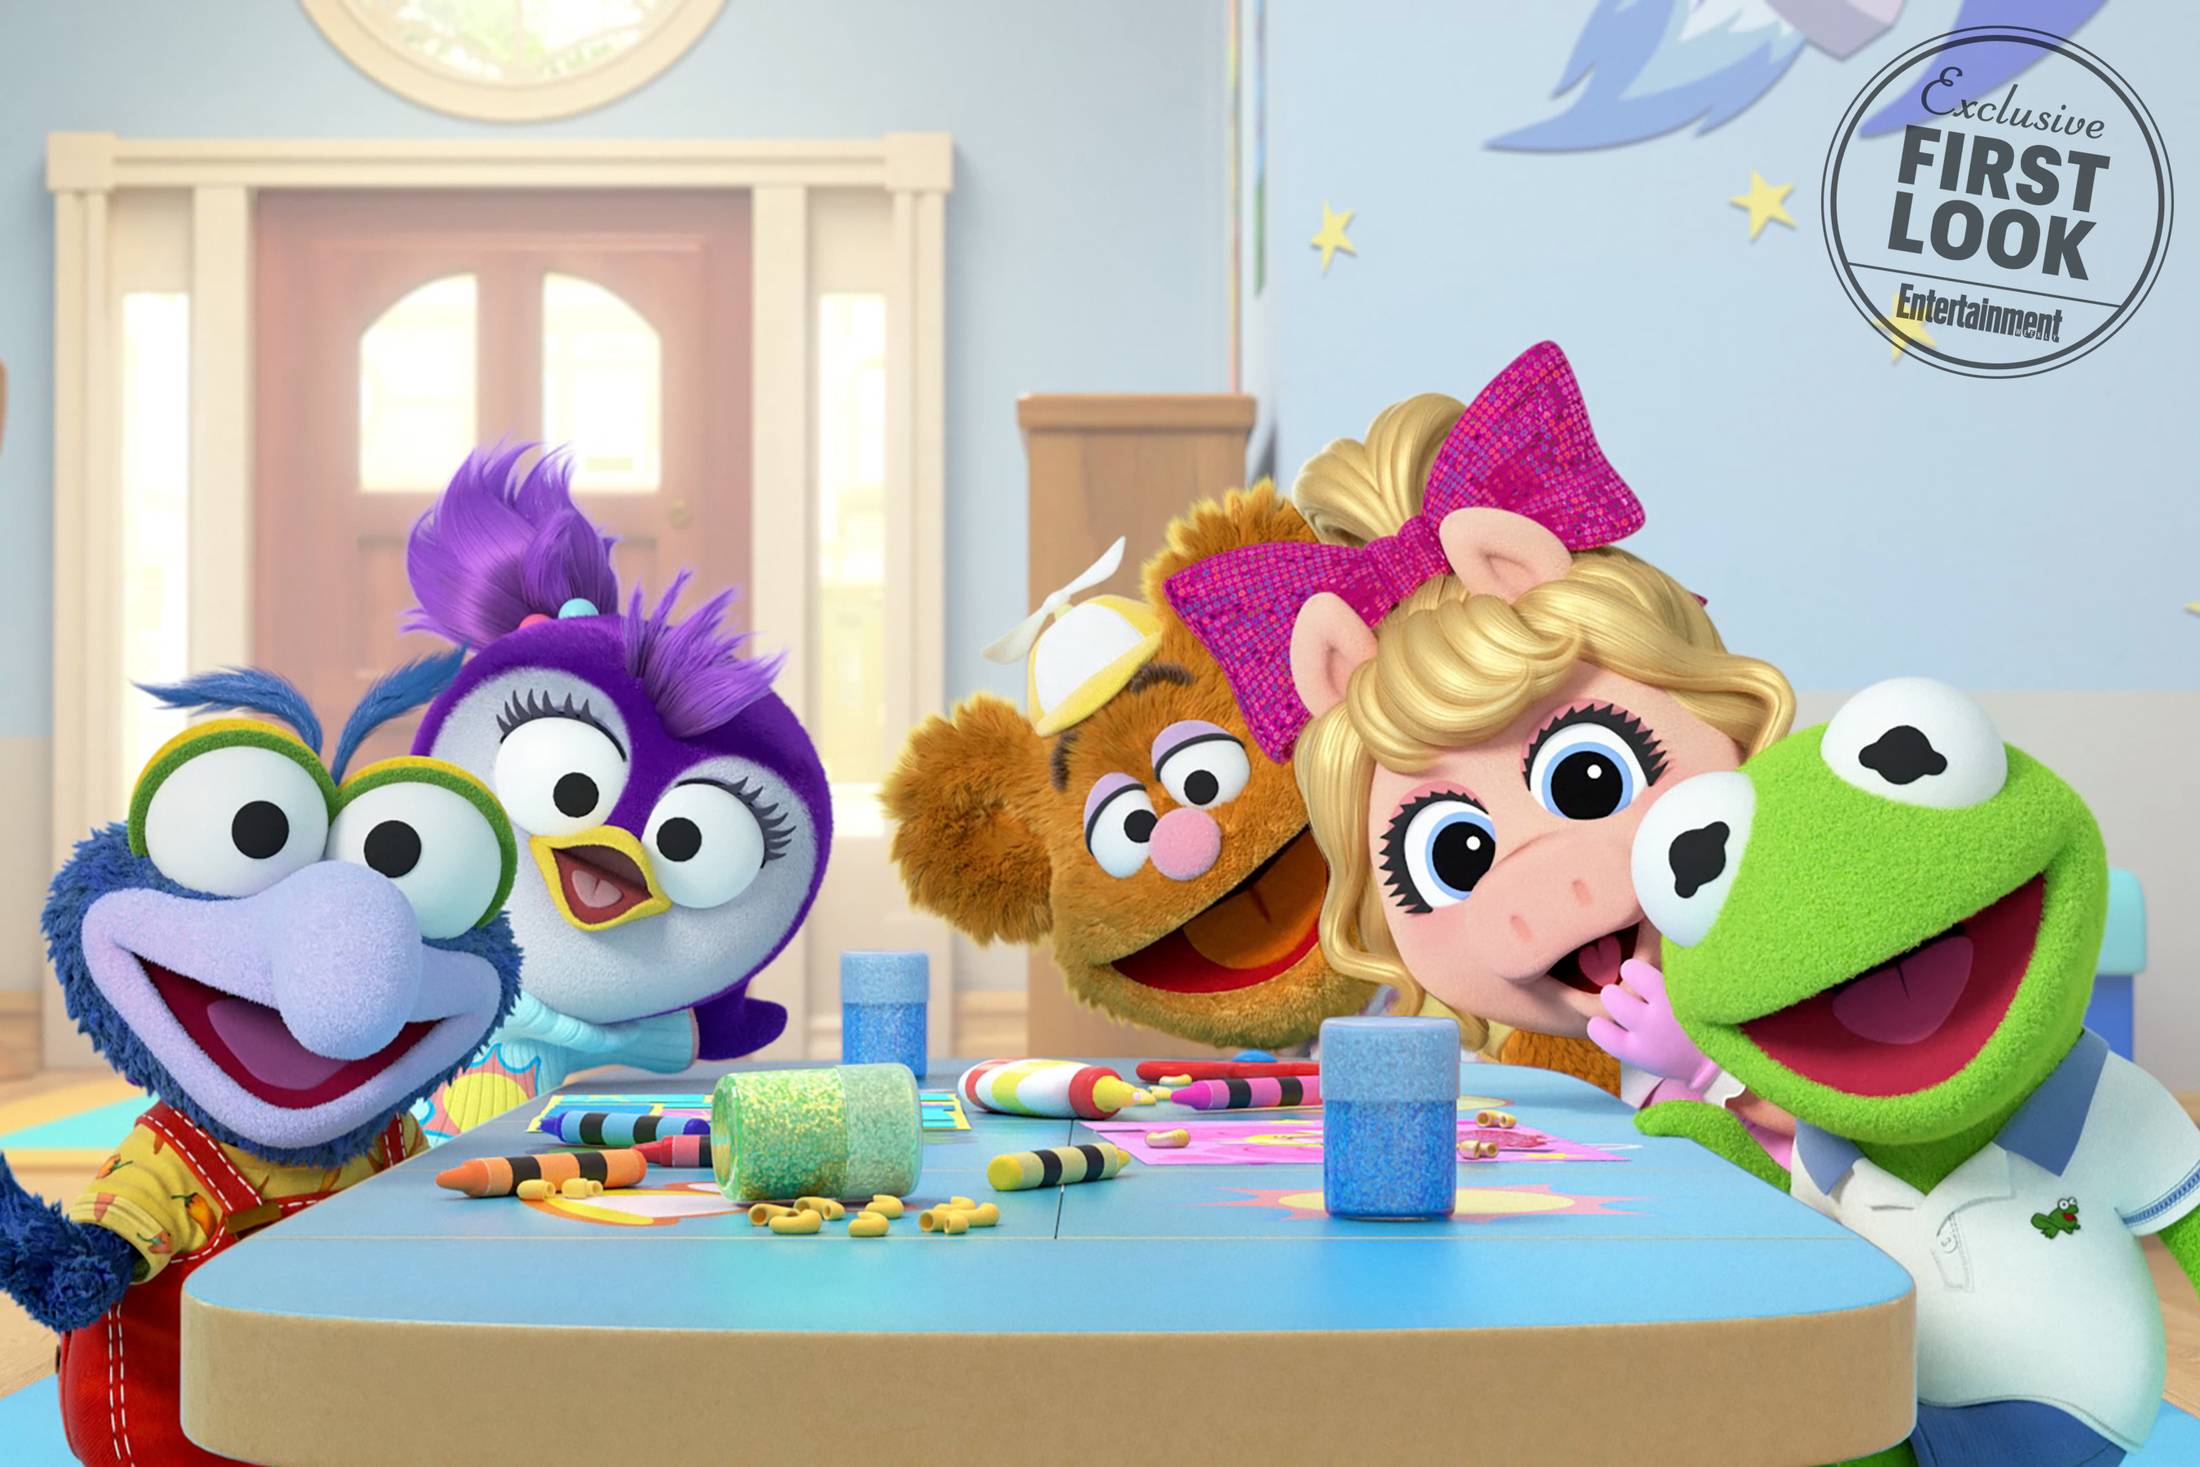 The All-New Muppet Babies Debuts in March on Disney Junior.